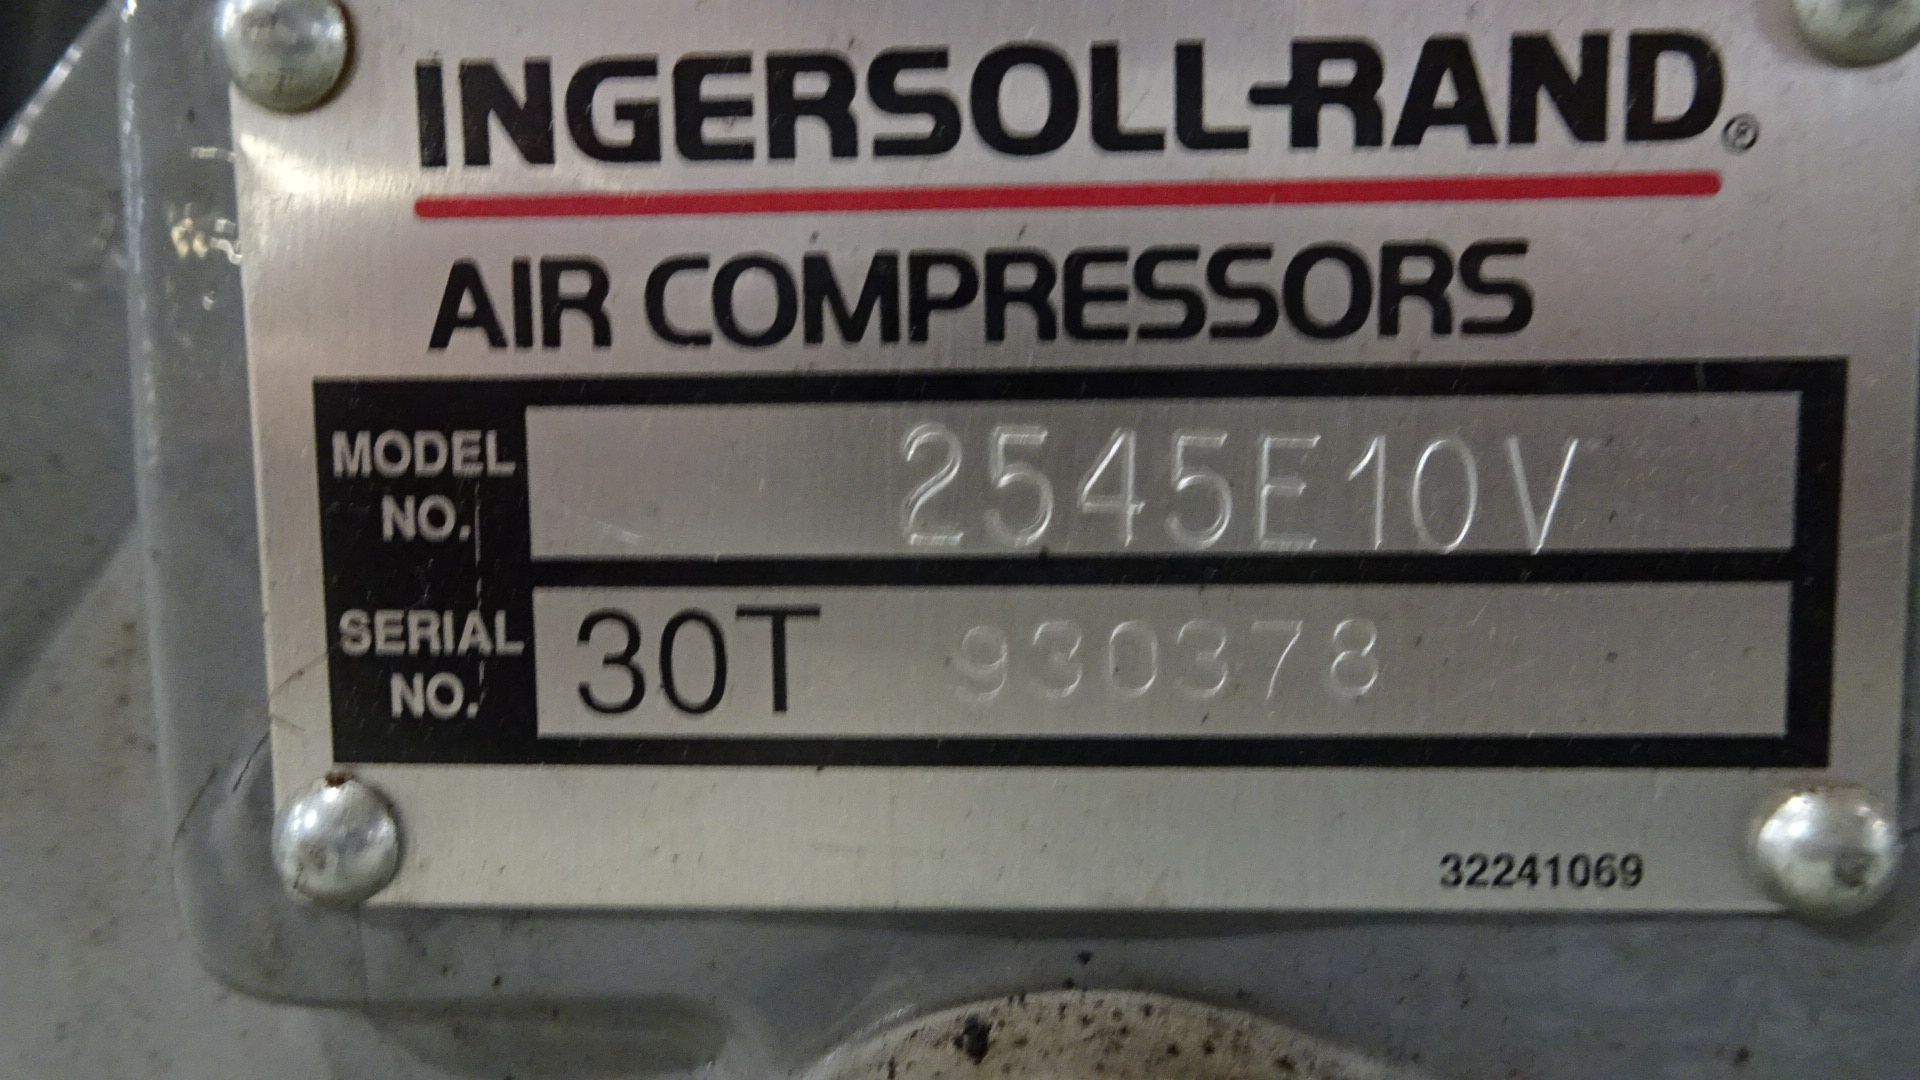 INGERSOLL-RAND MDL. T30-2545E10V 10 HP TWIN PISTON HORIZONTAL AIR COMPRESSOR WITH APPROXIMATELY - Image 3 of 3